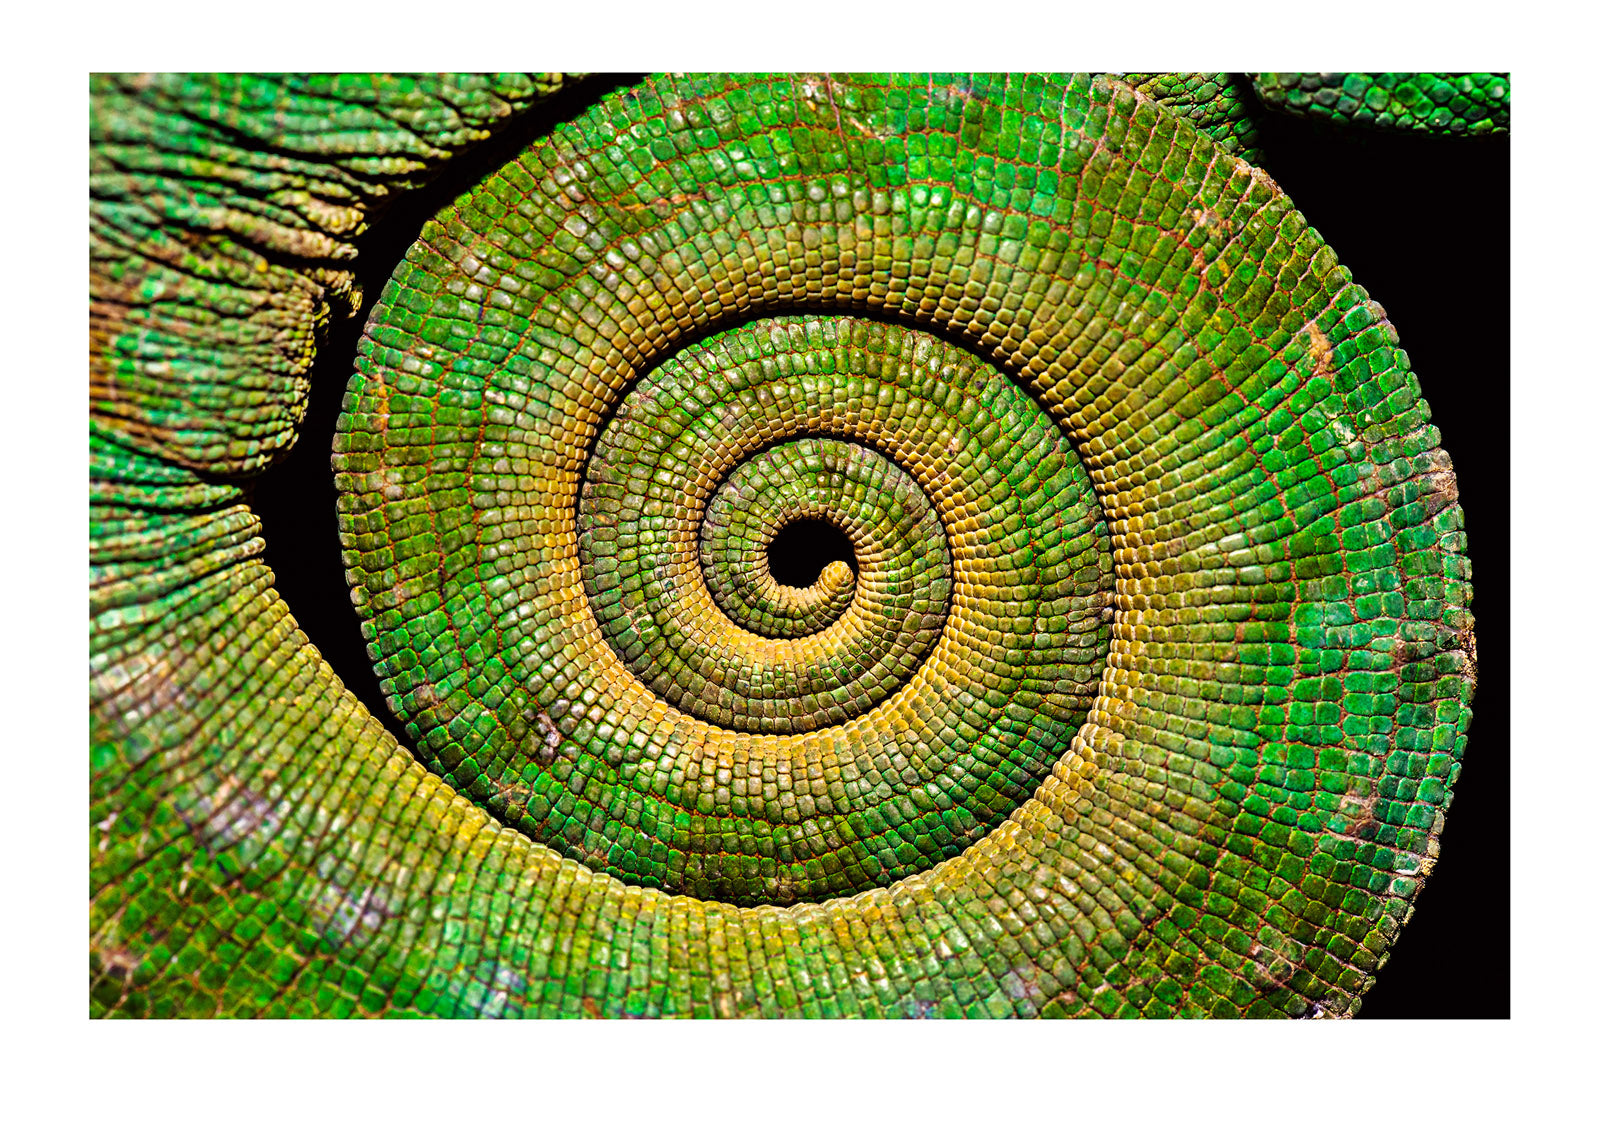 The geometric scales of a Parsons Chameleon tail. When at rest, the long prehensile appendage coils beneath the reptile in an elegant spiral. When awake and active, it becomes an anchor or fifth-leg to enable the chameleon to remain motionless whilst hunting or moving between branches.